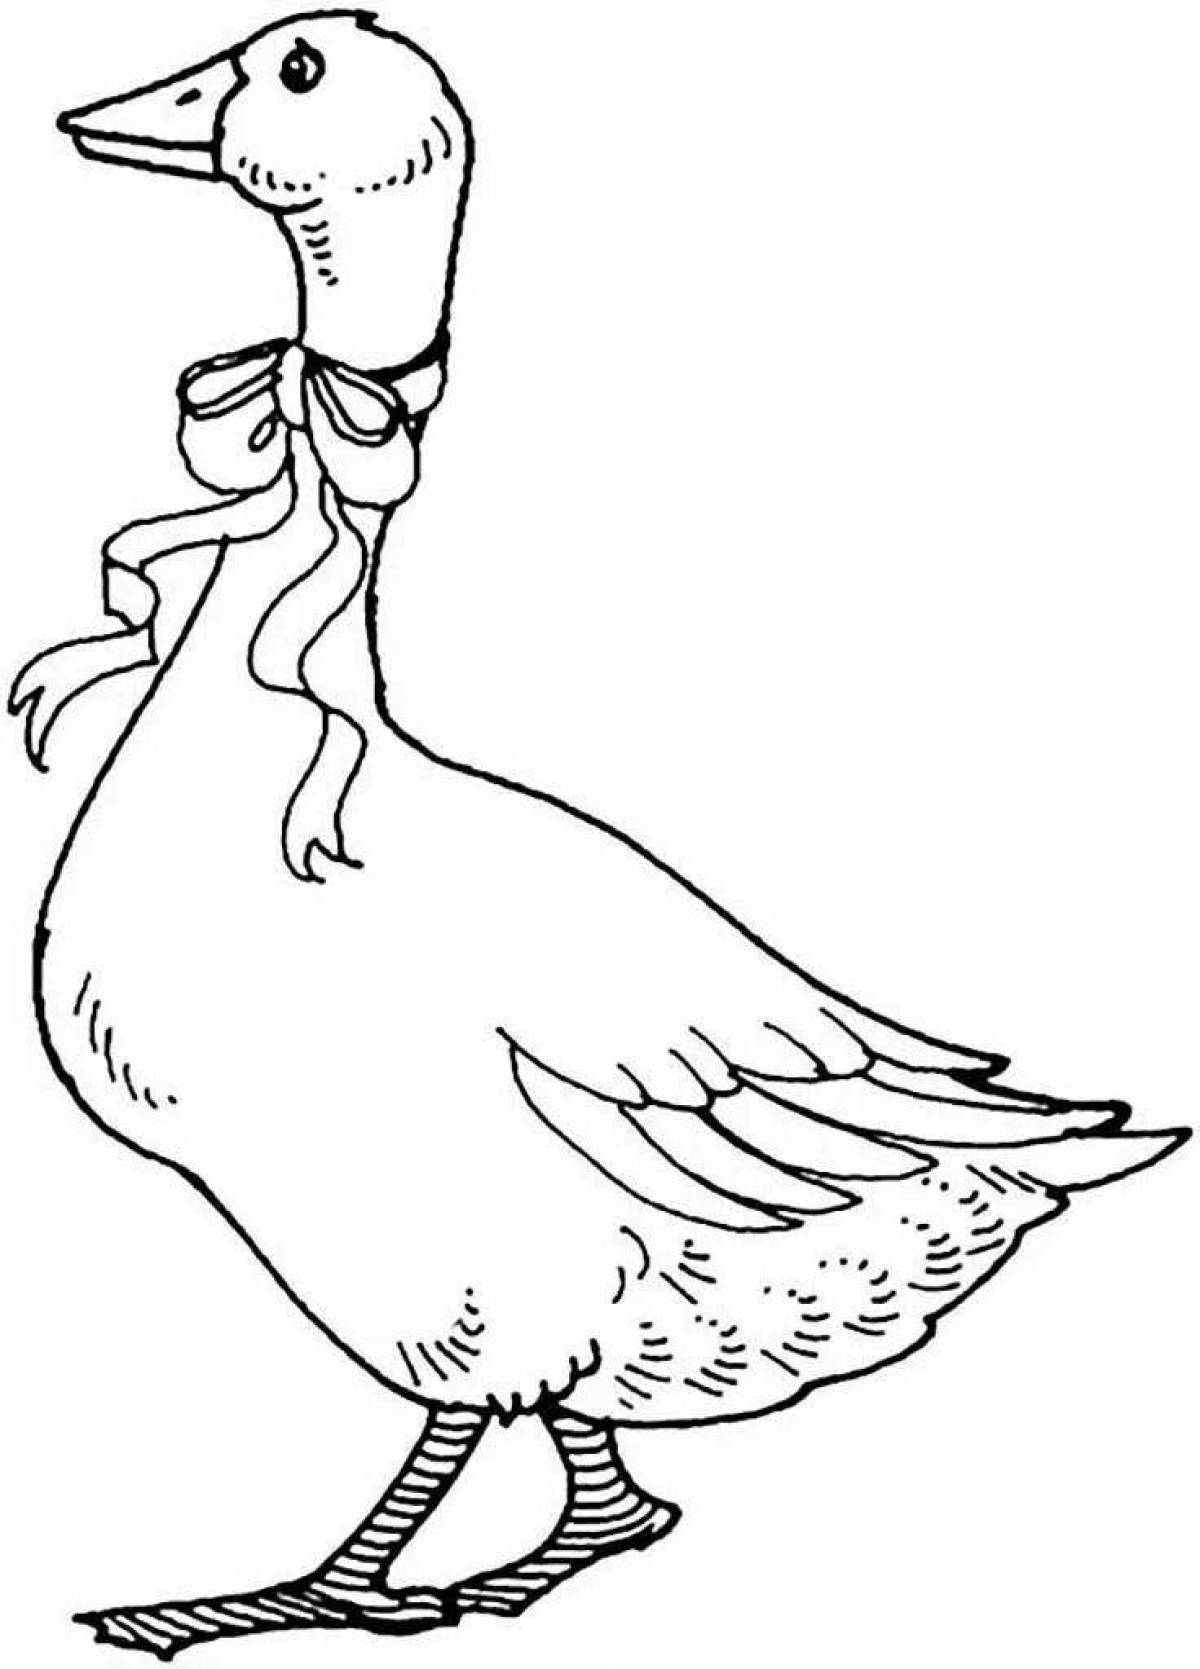 Glorious gosling coloring page